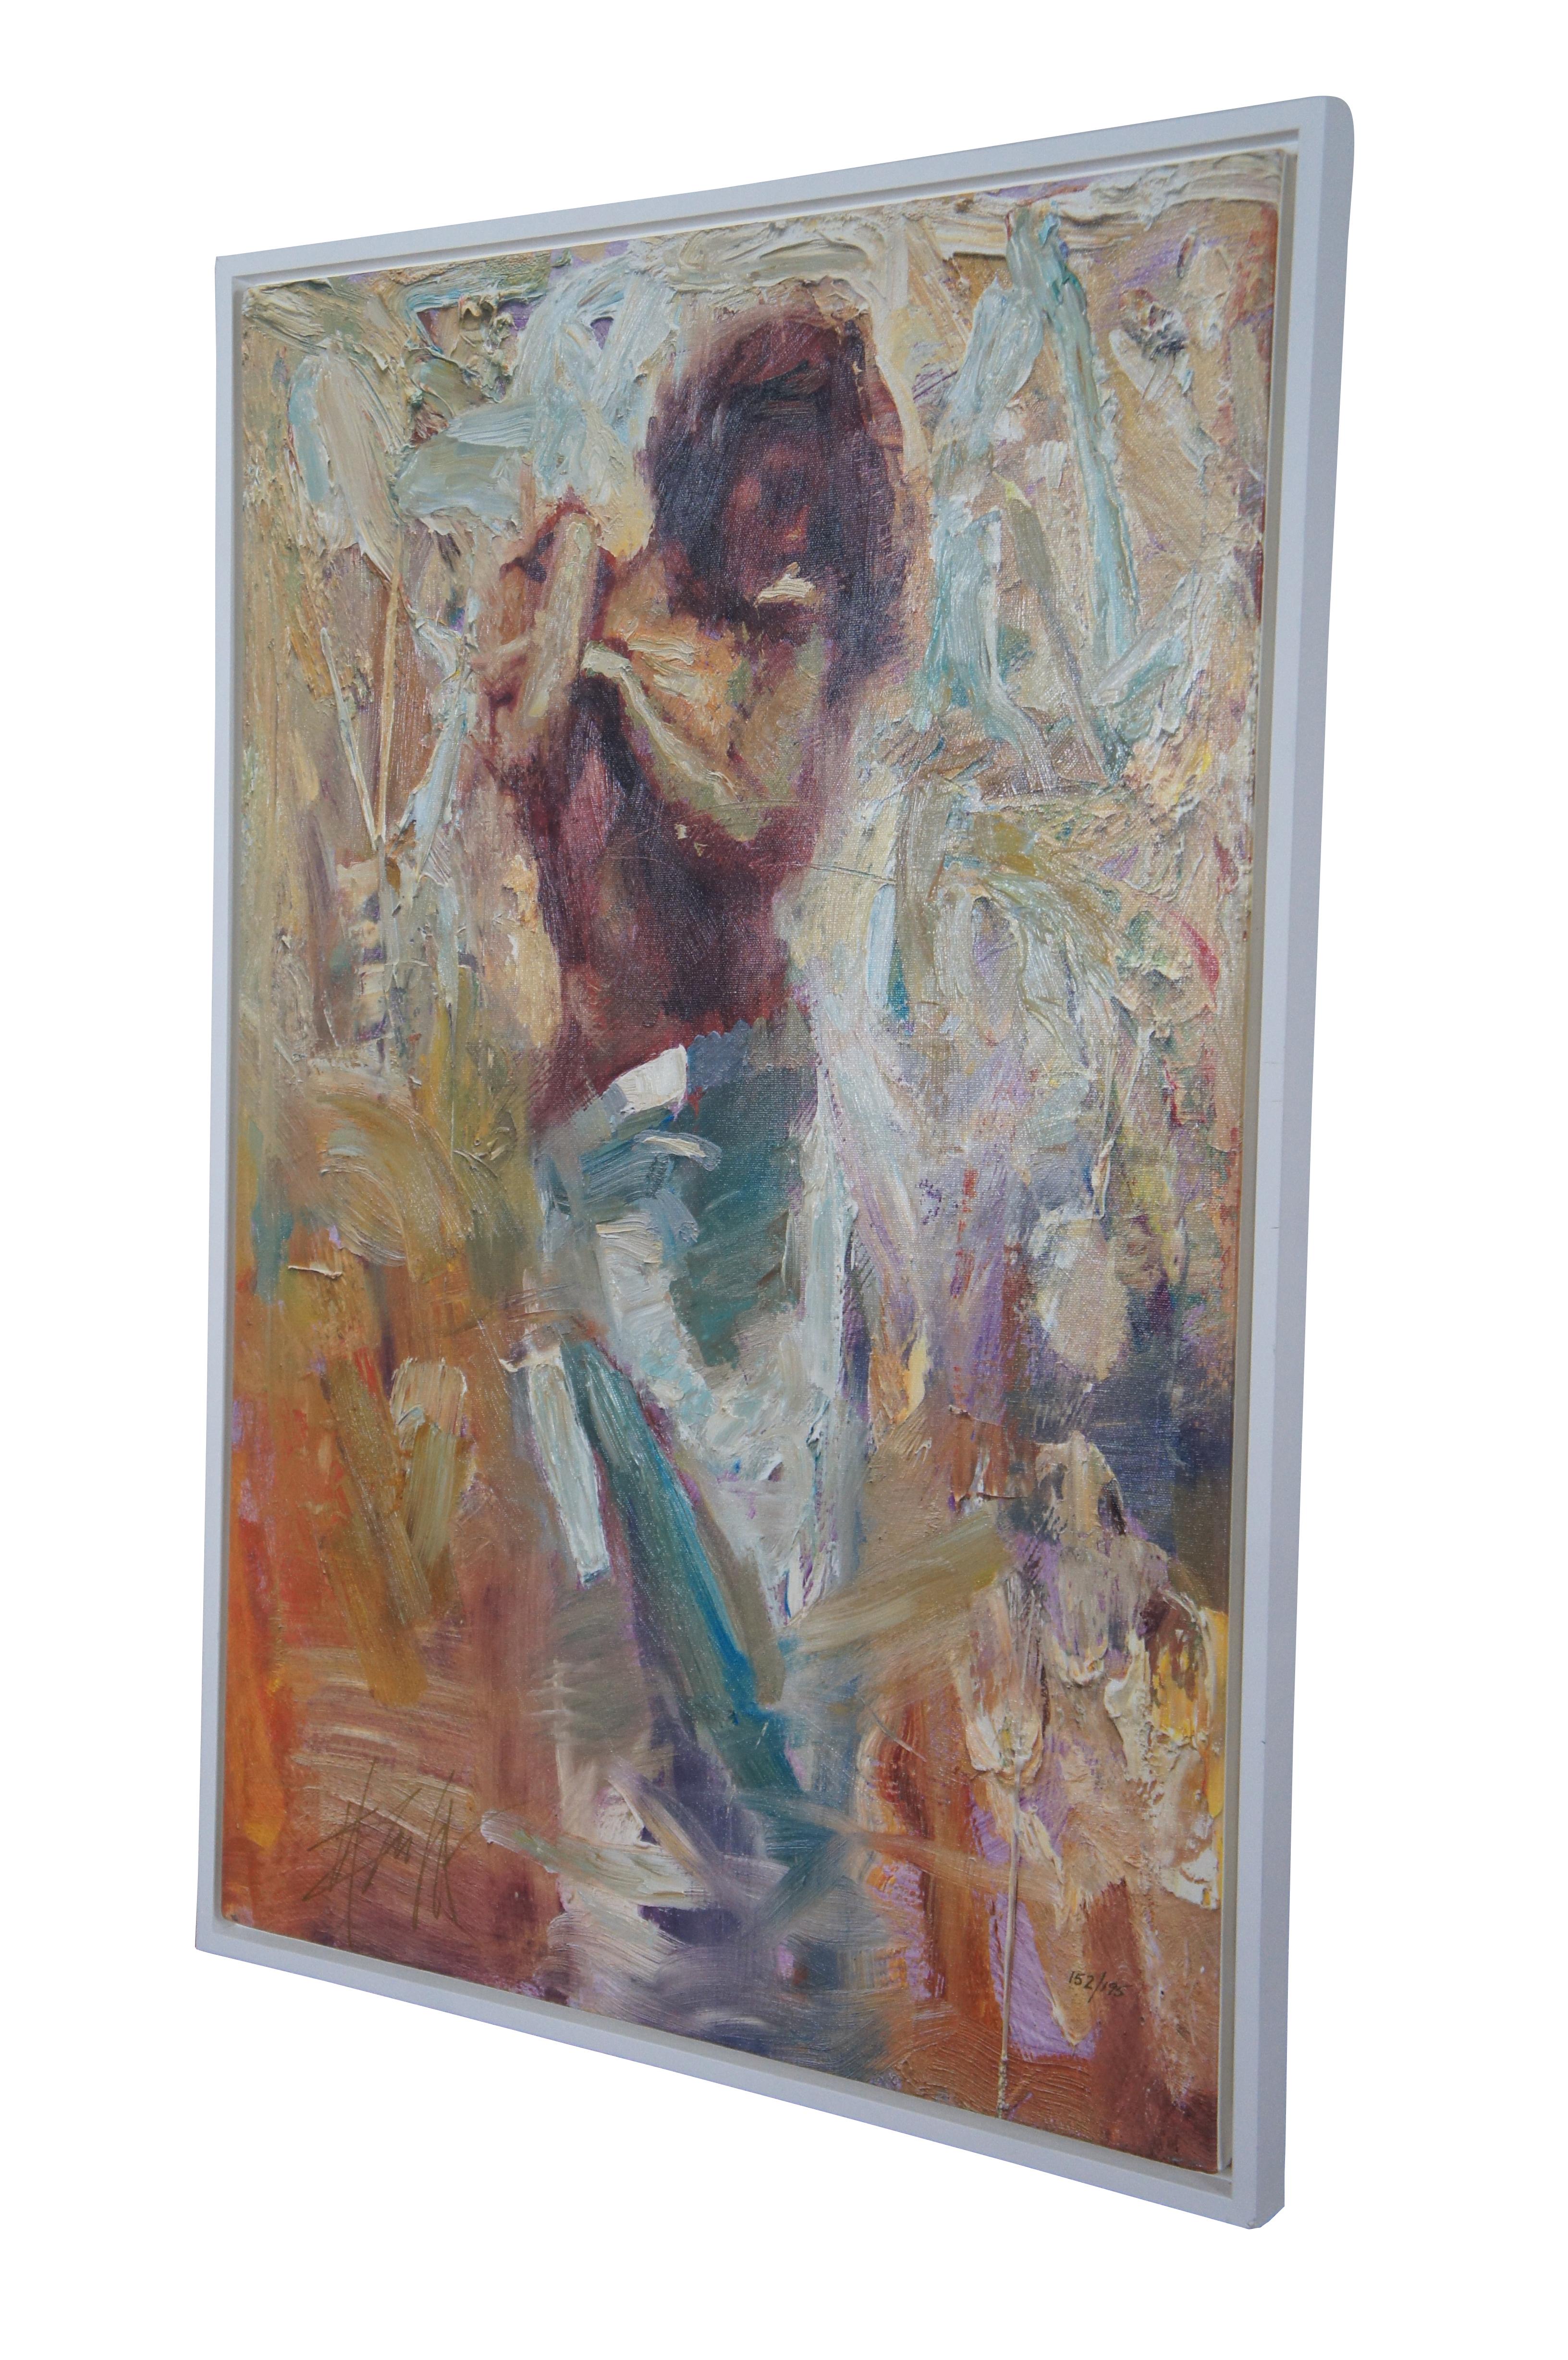 Vintage giclee on canvas titled “Transition” by Henry Asencio with hand embellished texture. Shows a partially nude female figure with brown hair and arms crossed over her upper torso, her lower half wrapped in white cloth, in a multi-colored